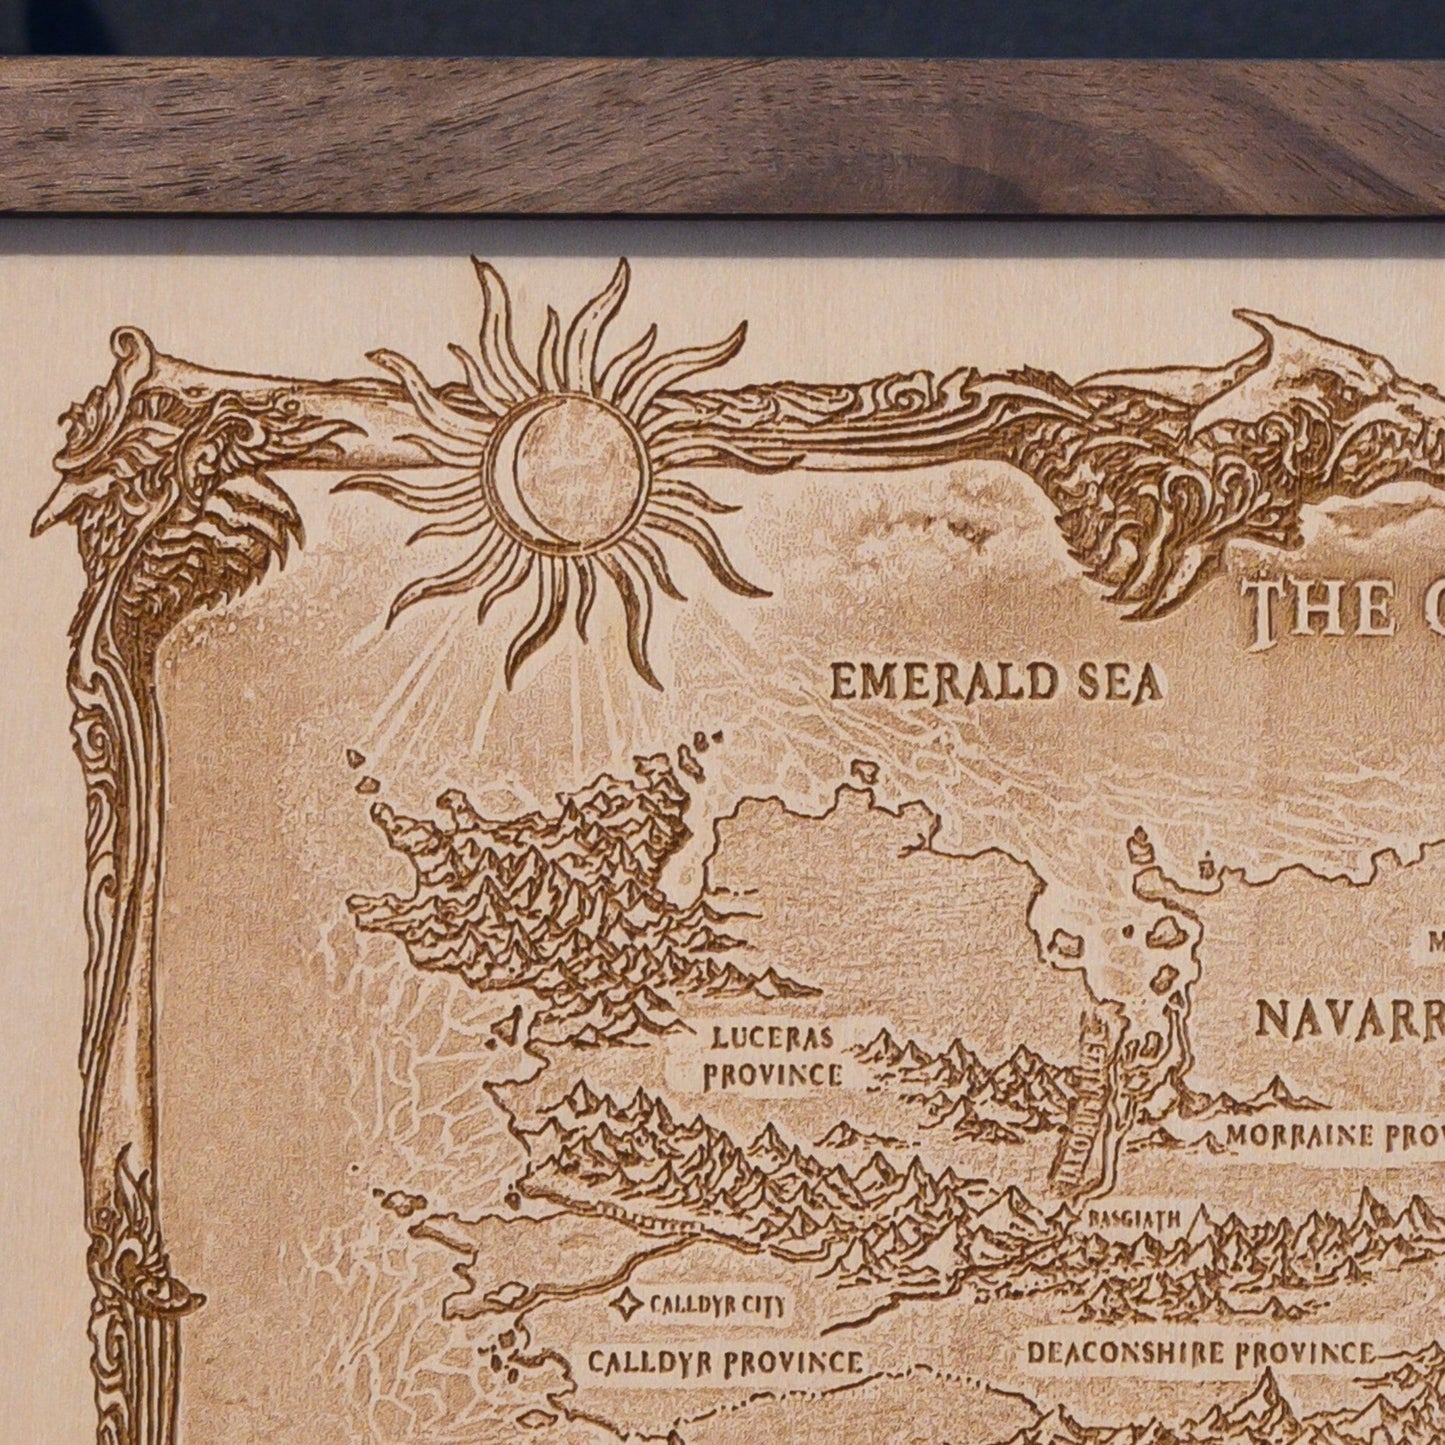 Fourth Wing/Iron Flame Map, Wood Engraved Map